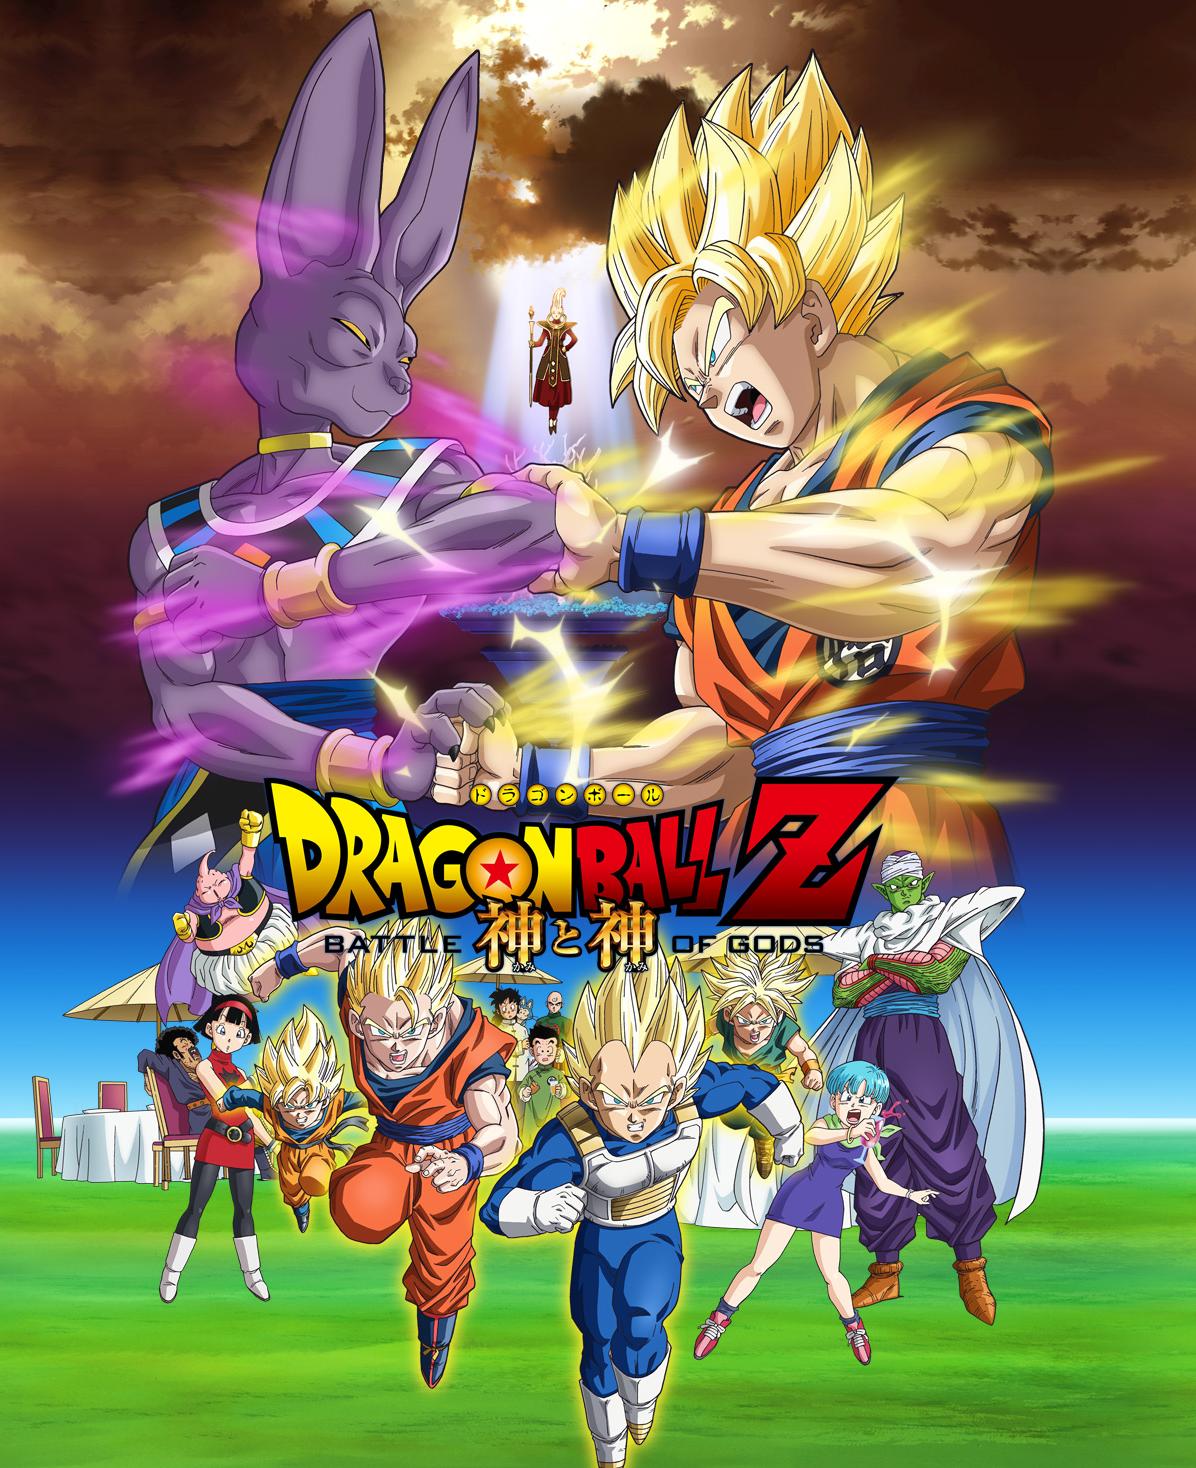 dragon ball battle of the gods dubbed